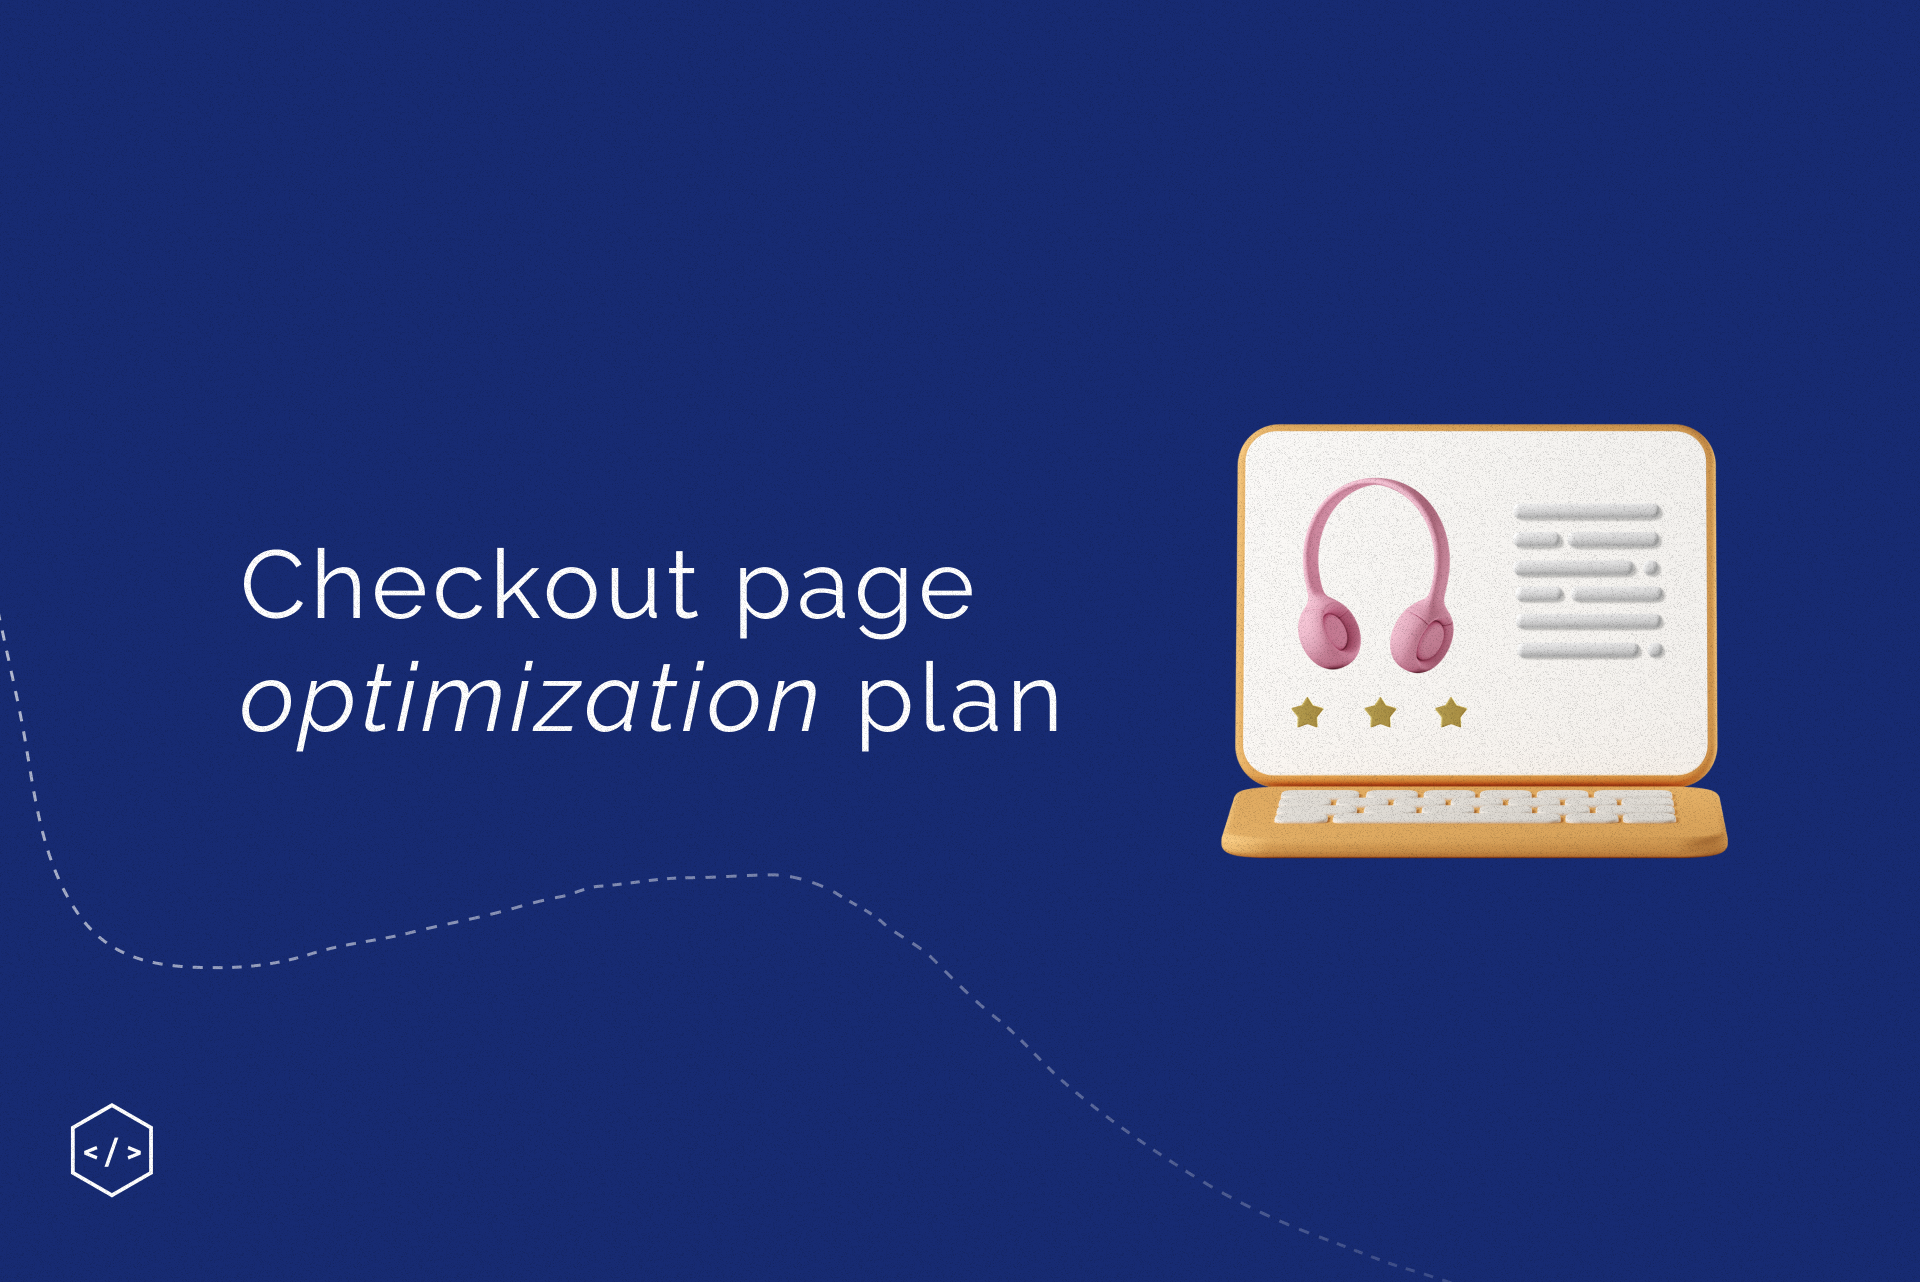 How do we optimize the checkout process so that visitors do not leave?